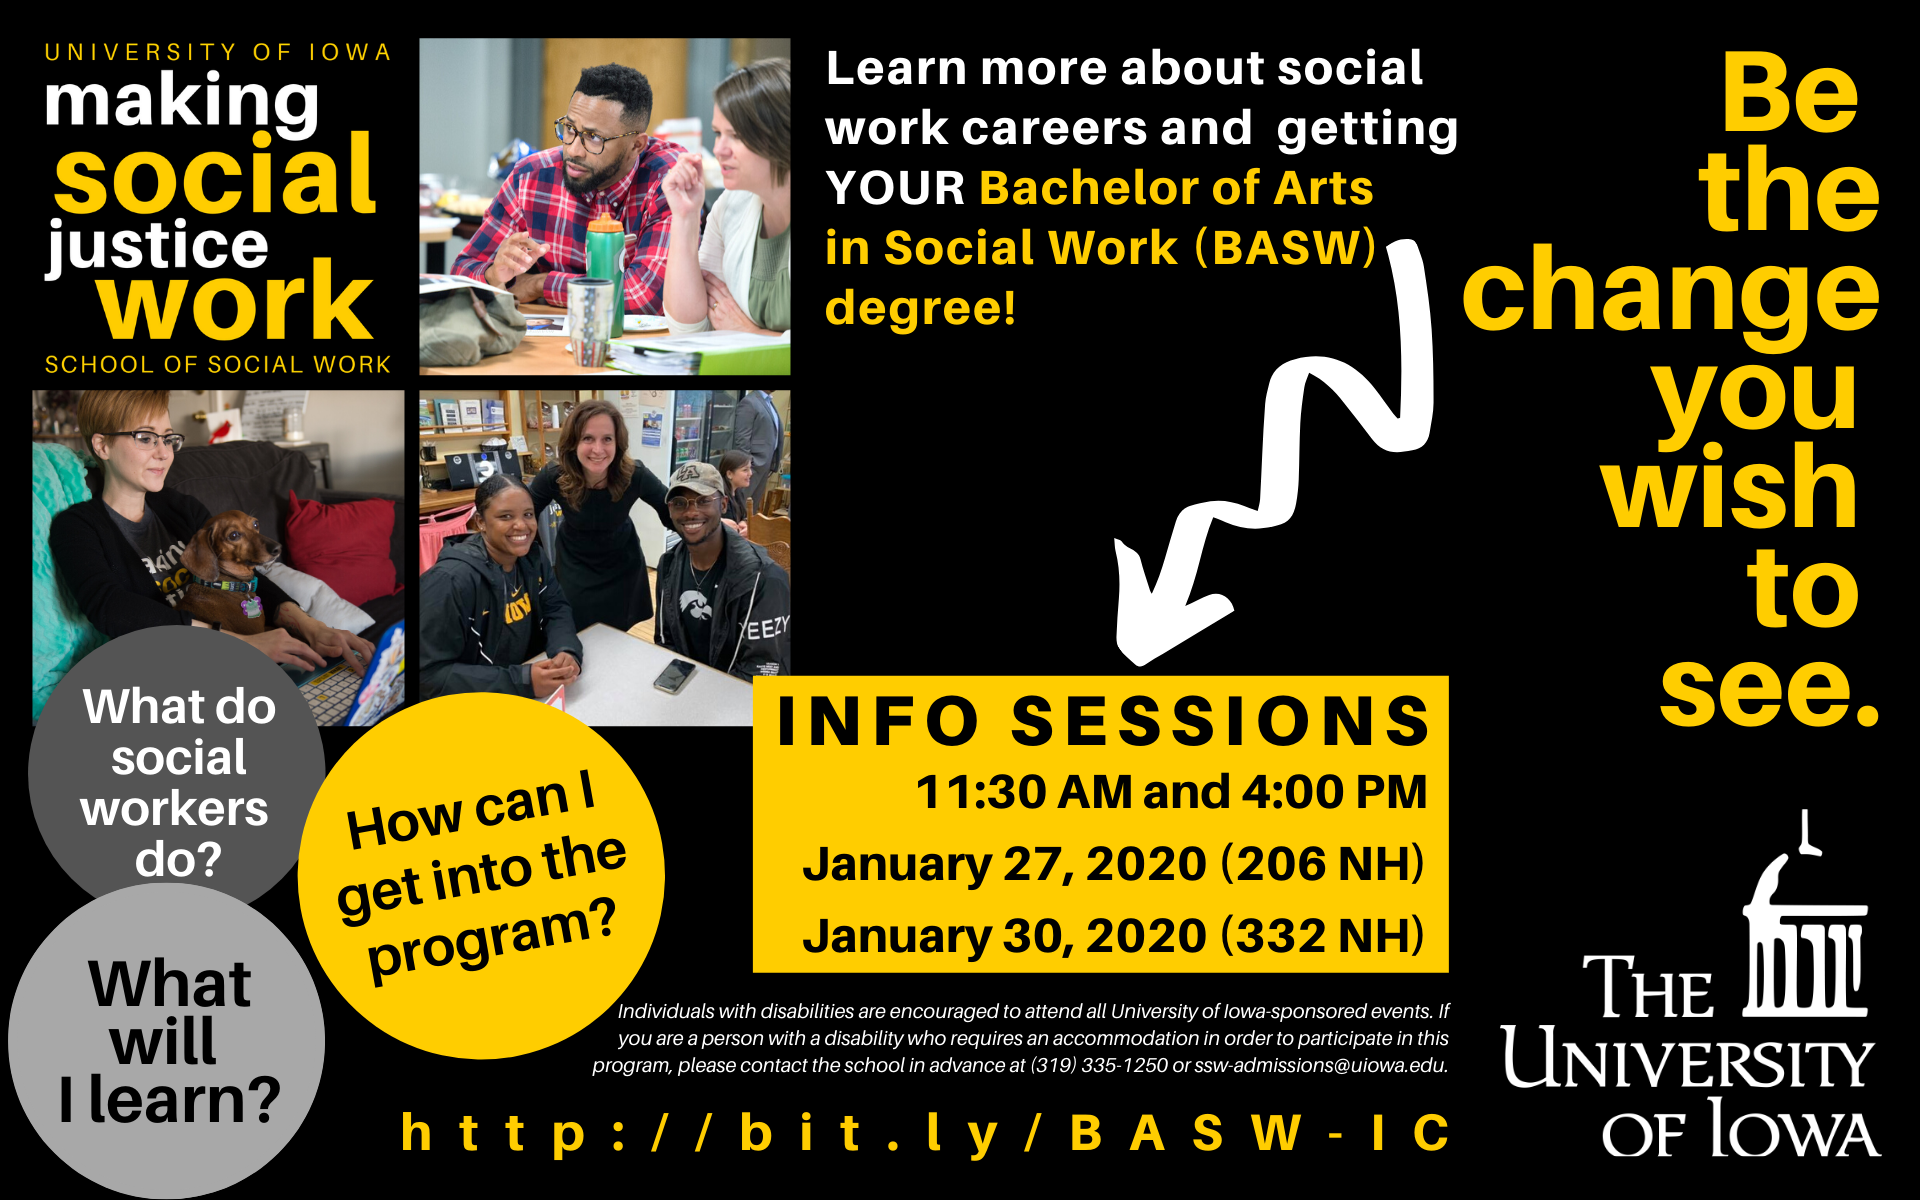 learn about a BASW degree Jan 27 or 30 in North Hall